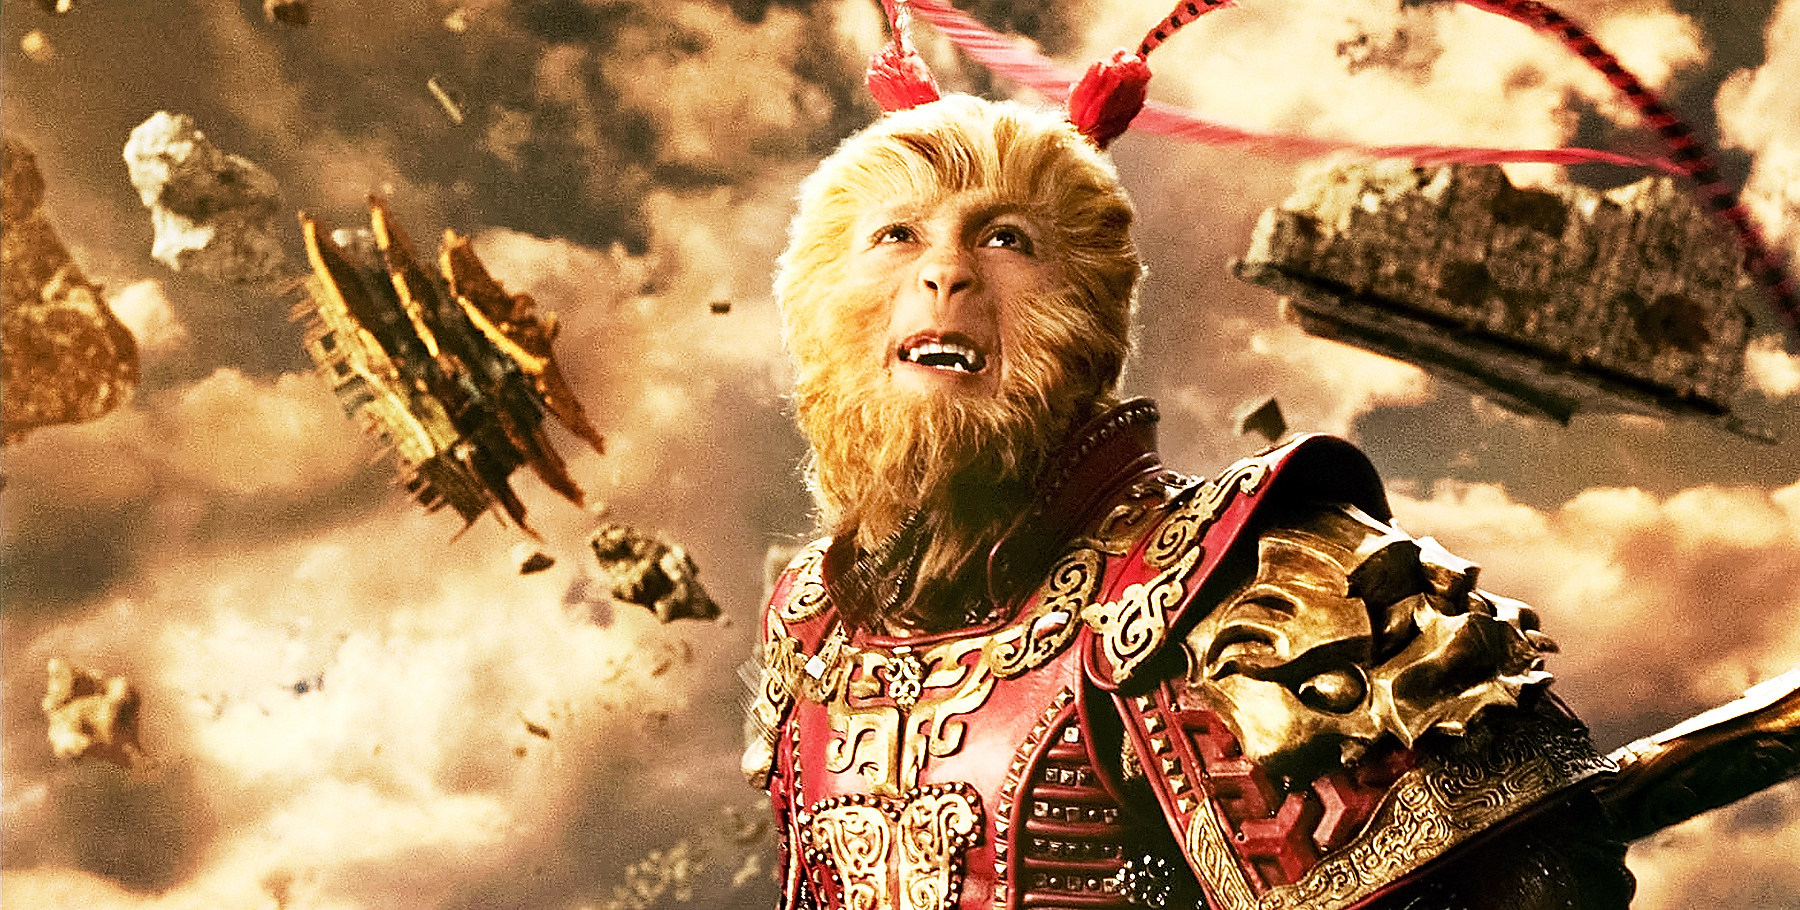 If former ambassador Ciu Tiankai had to find an image representative of China’s diplomatic style, he would choose Sun Wukong from Journey to the West. Photo: Handout